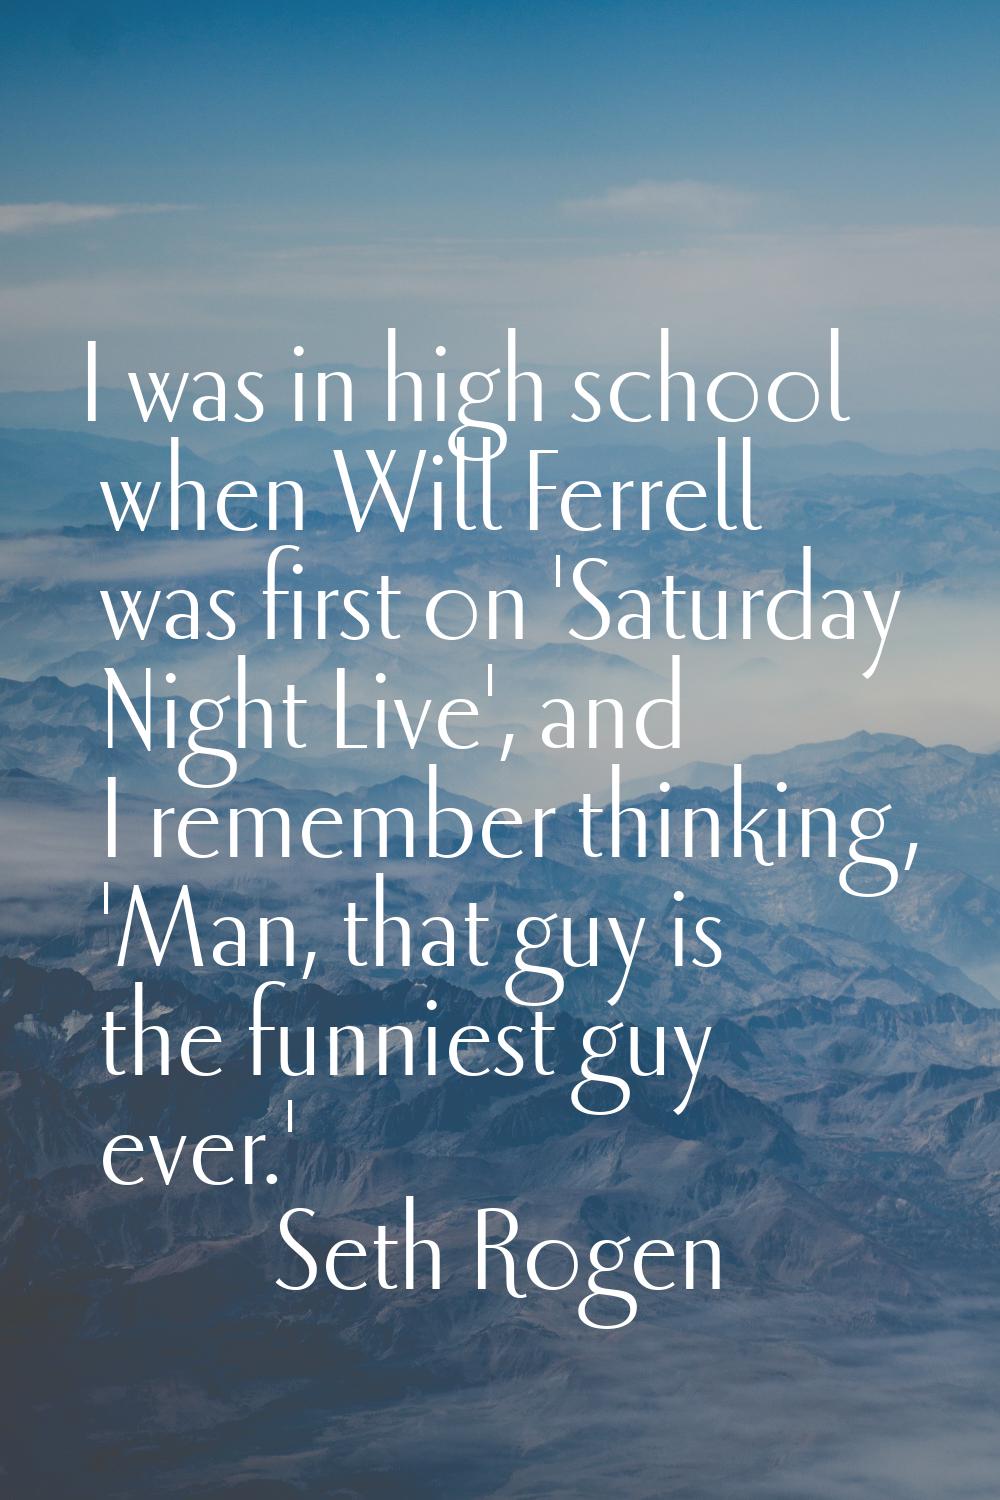 I was in high school when Will Ferrell was first on 'Saturday Night Live', and I remember thinking,